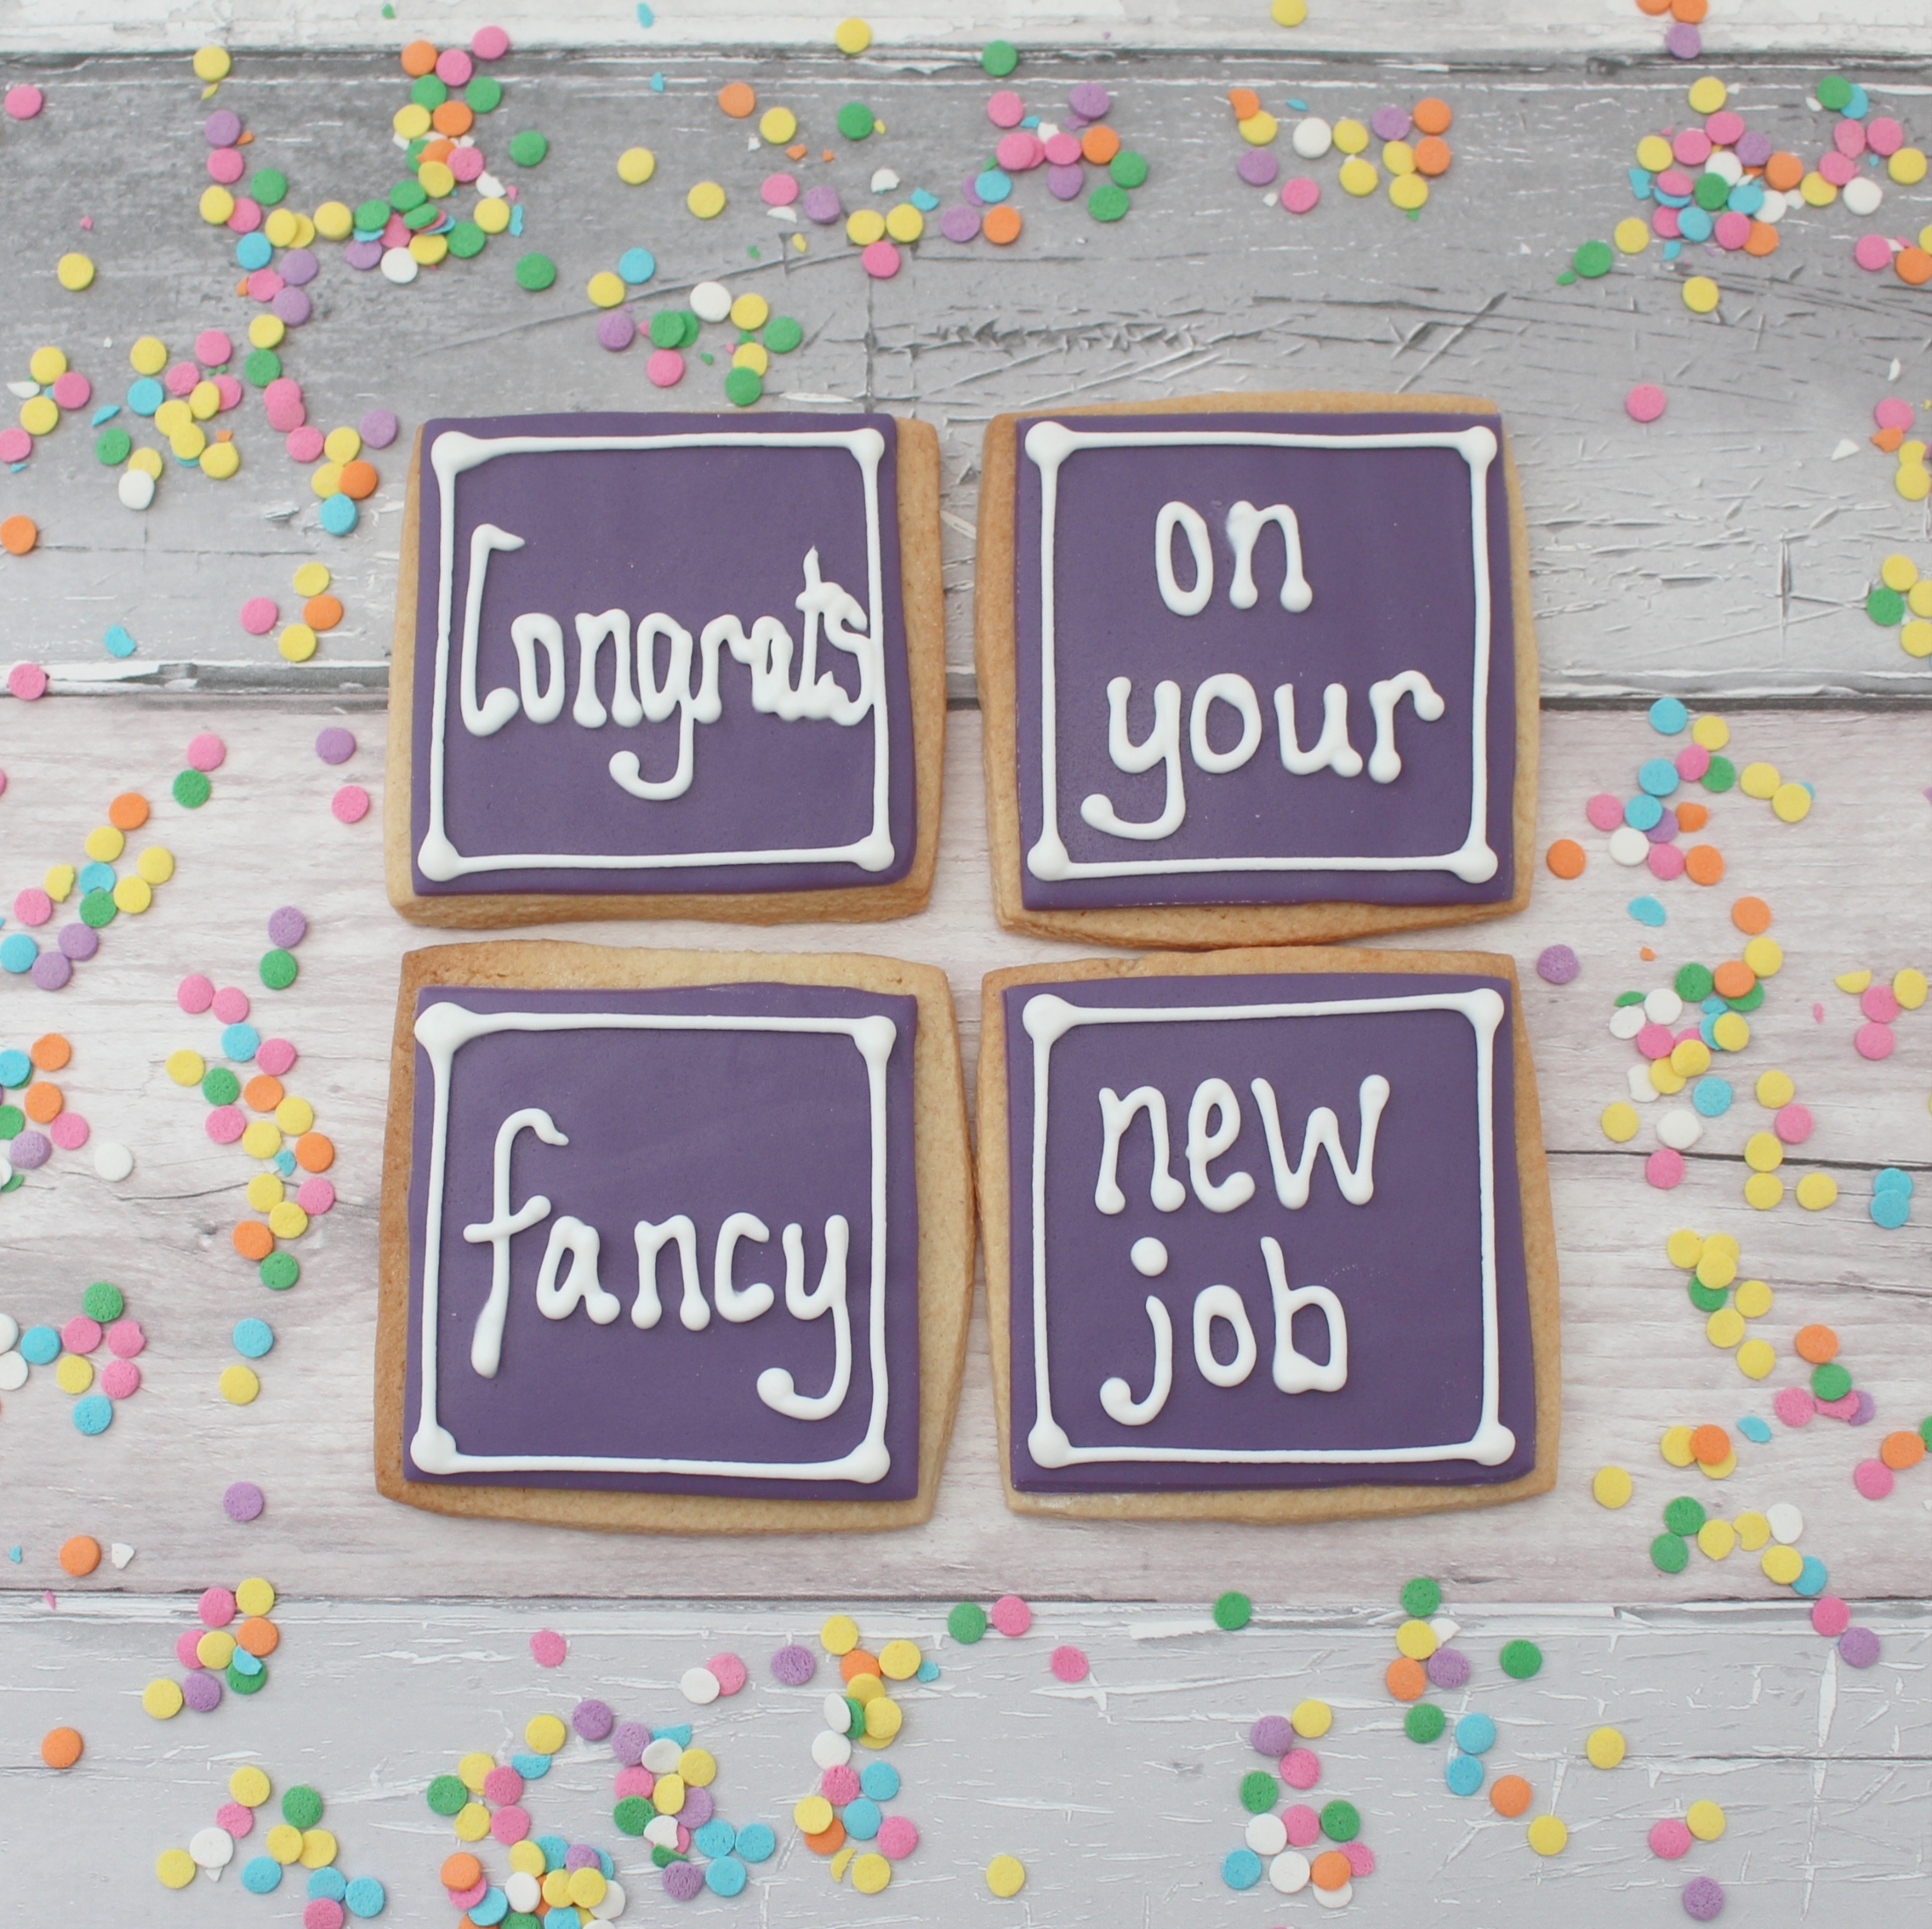 New job present – Congrats on your fancy new job | Marie's Bakehouse